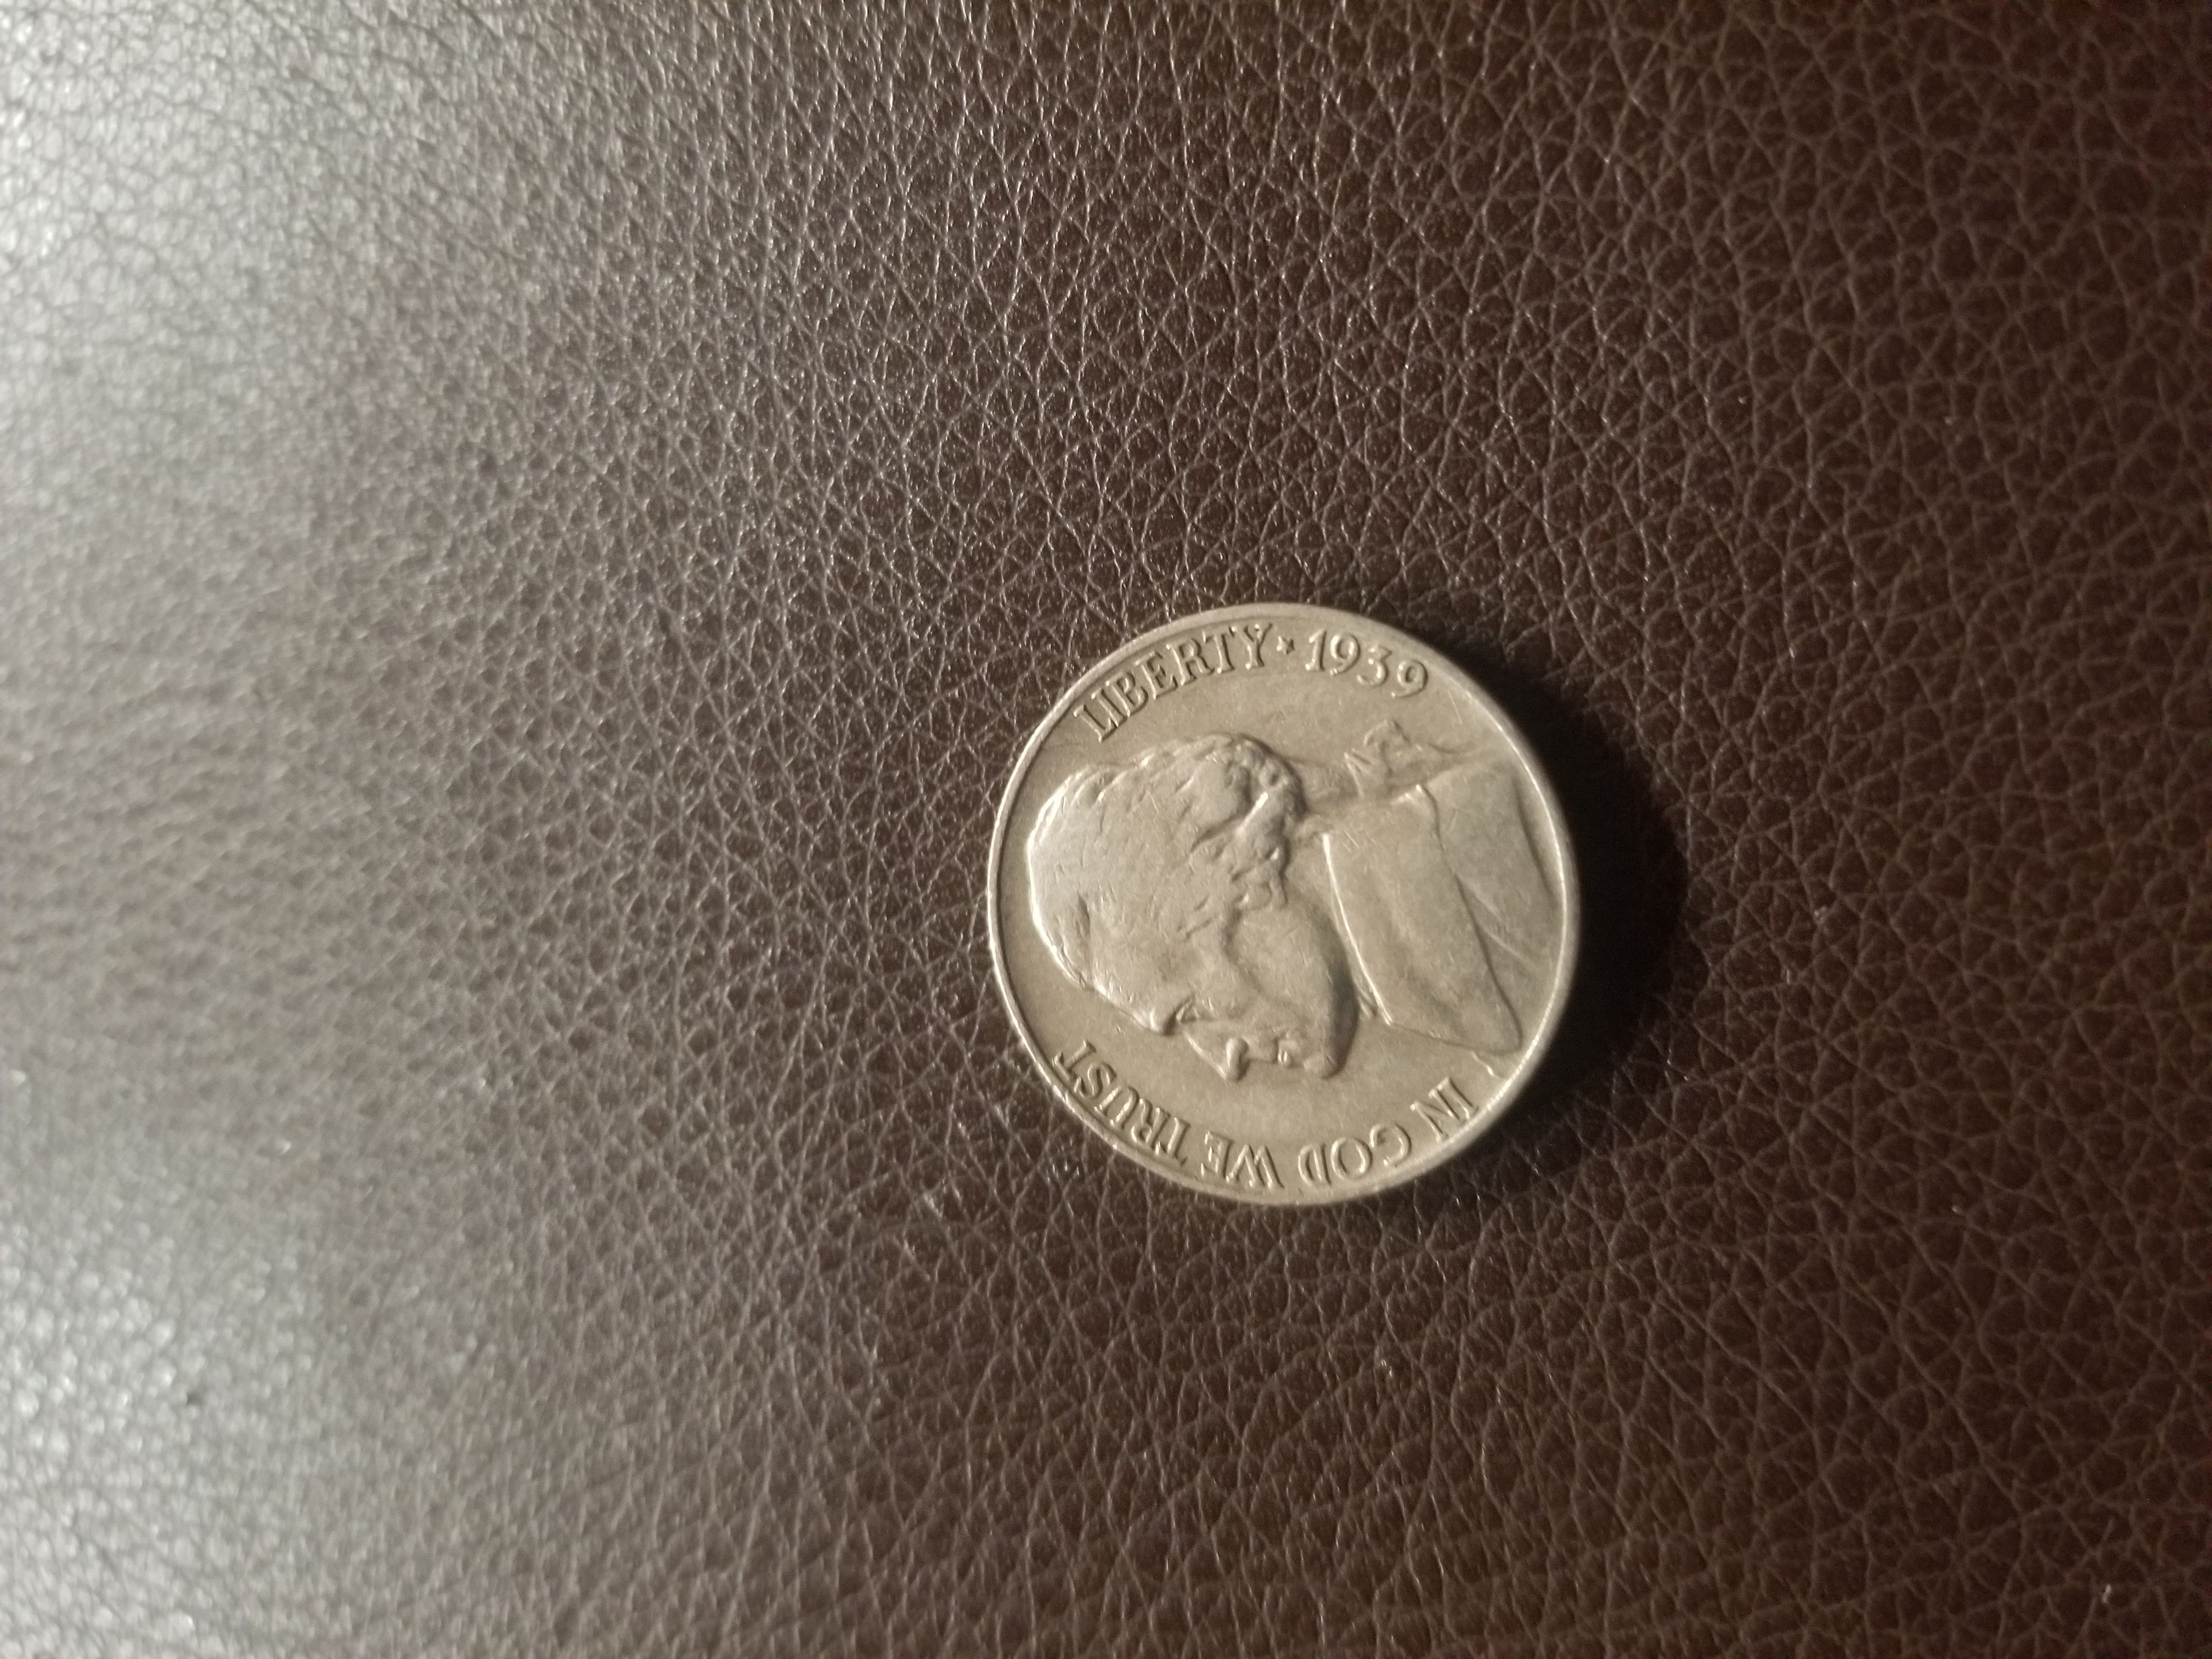 Got this coin in Change